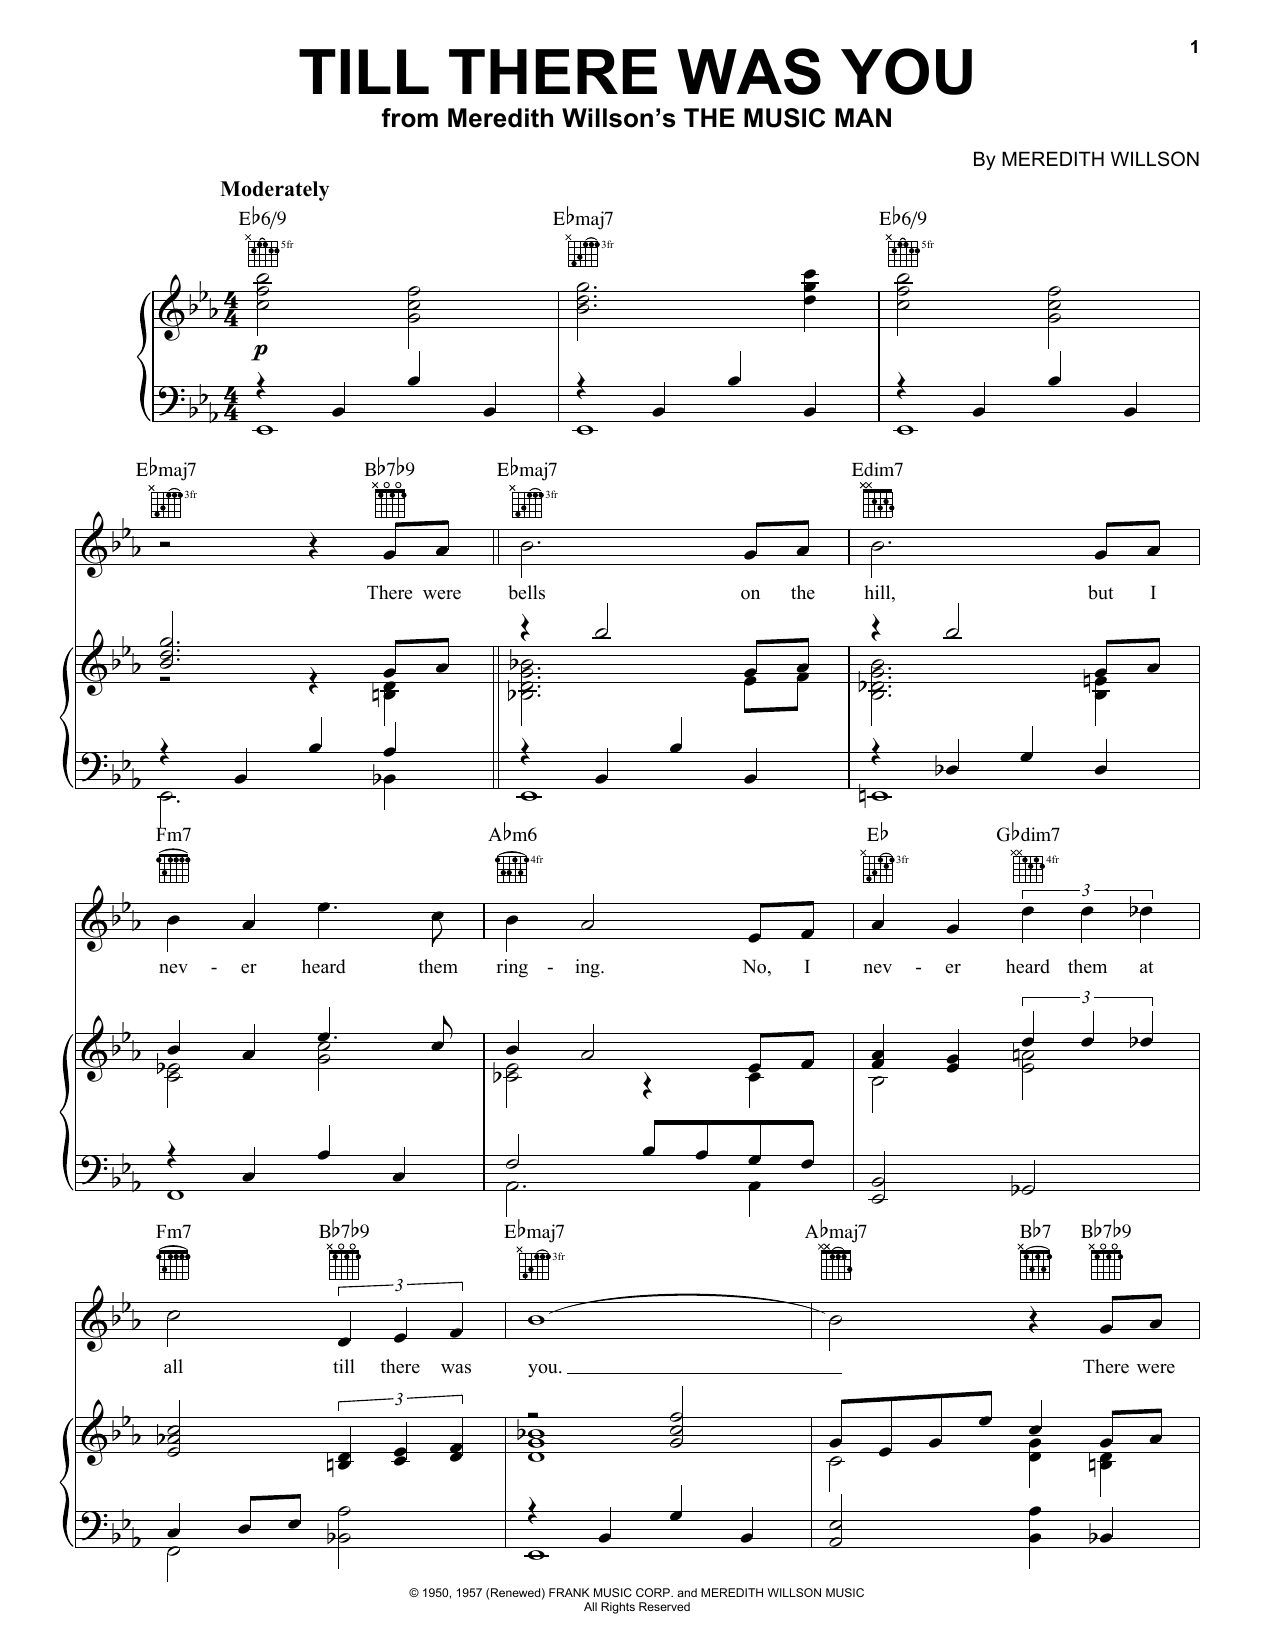 Download Meredith Willson Till There Was You Sheet Music